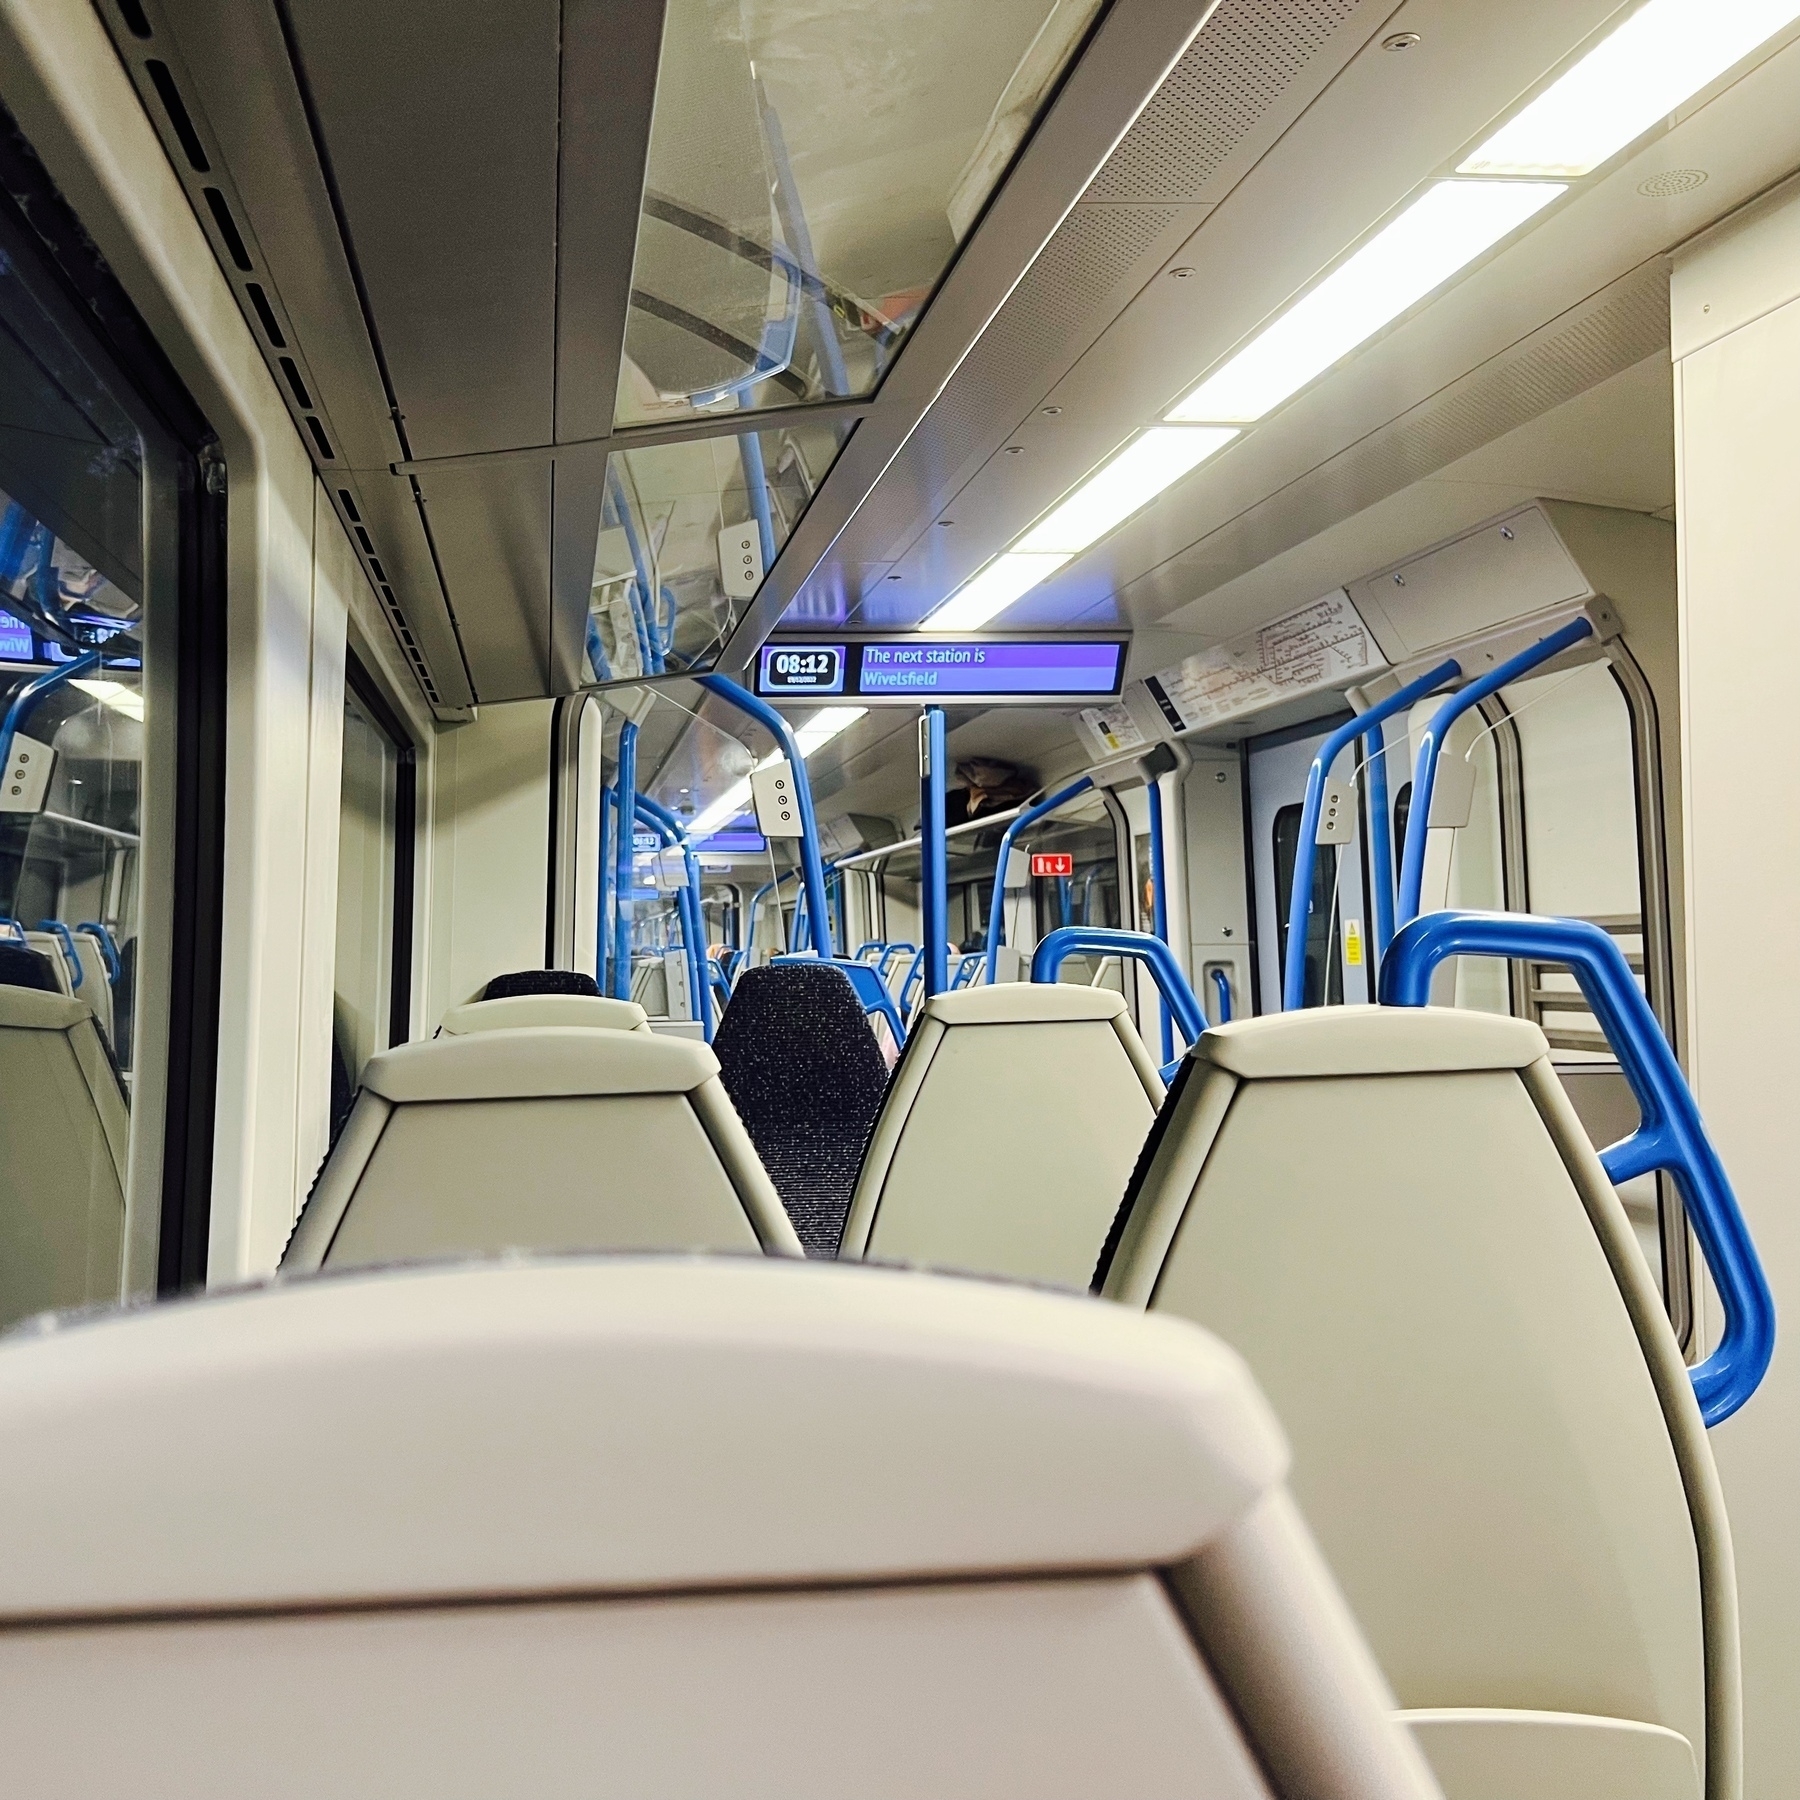 The inside of a Thameslink train carriage. 